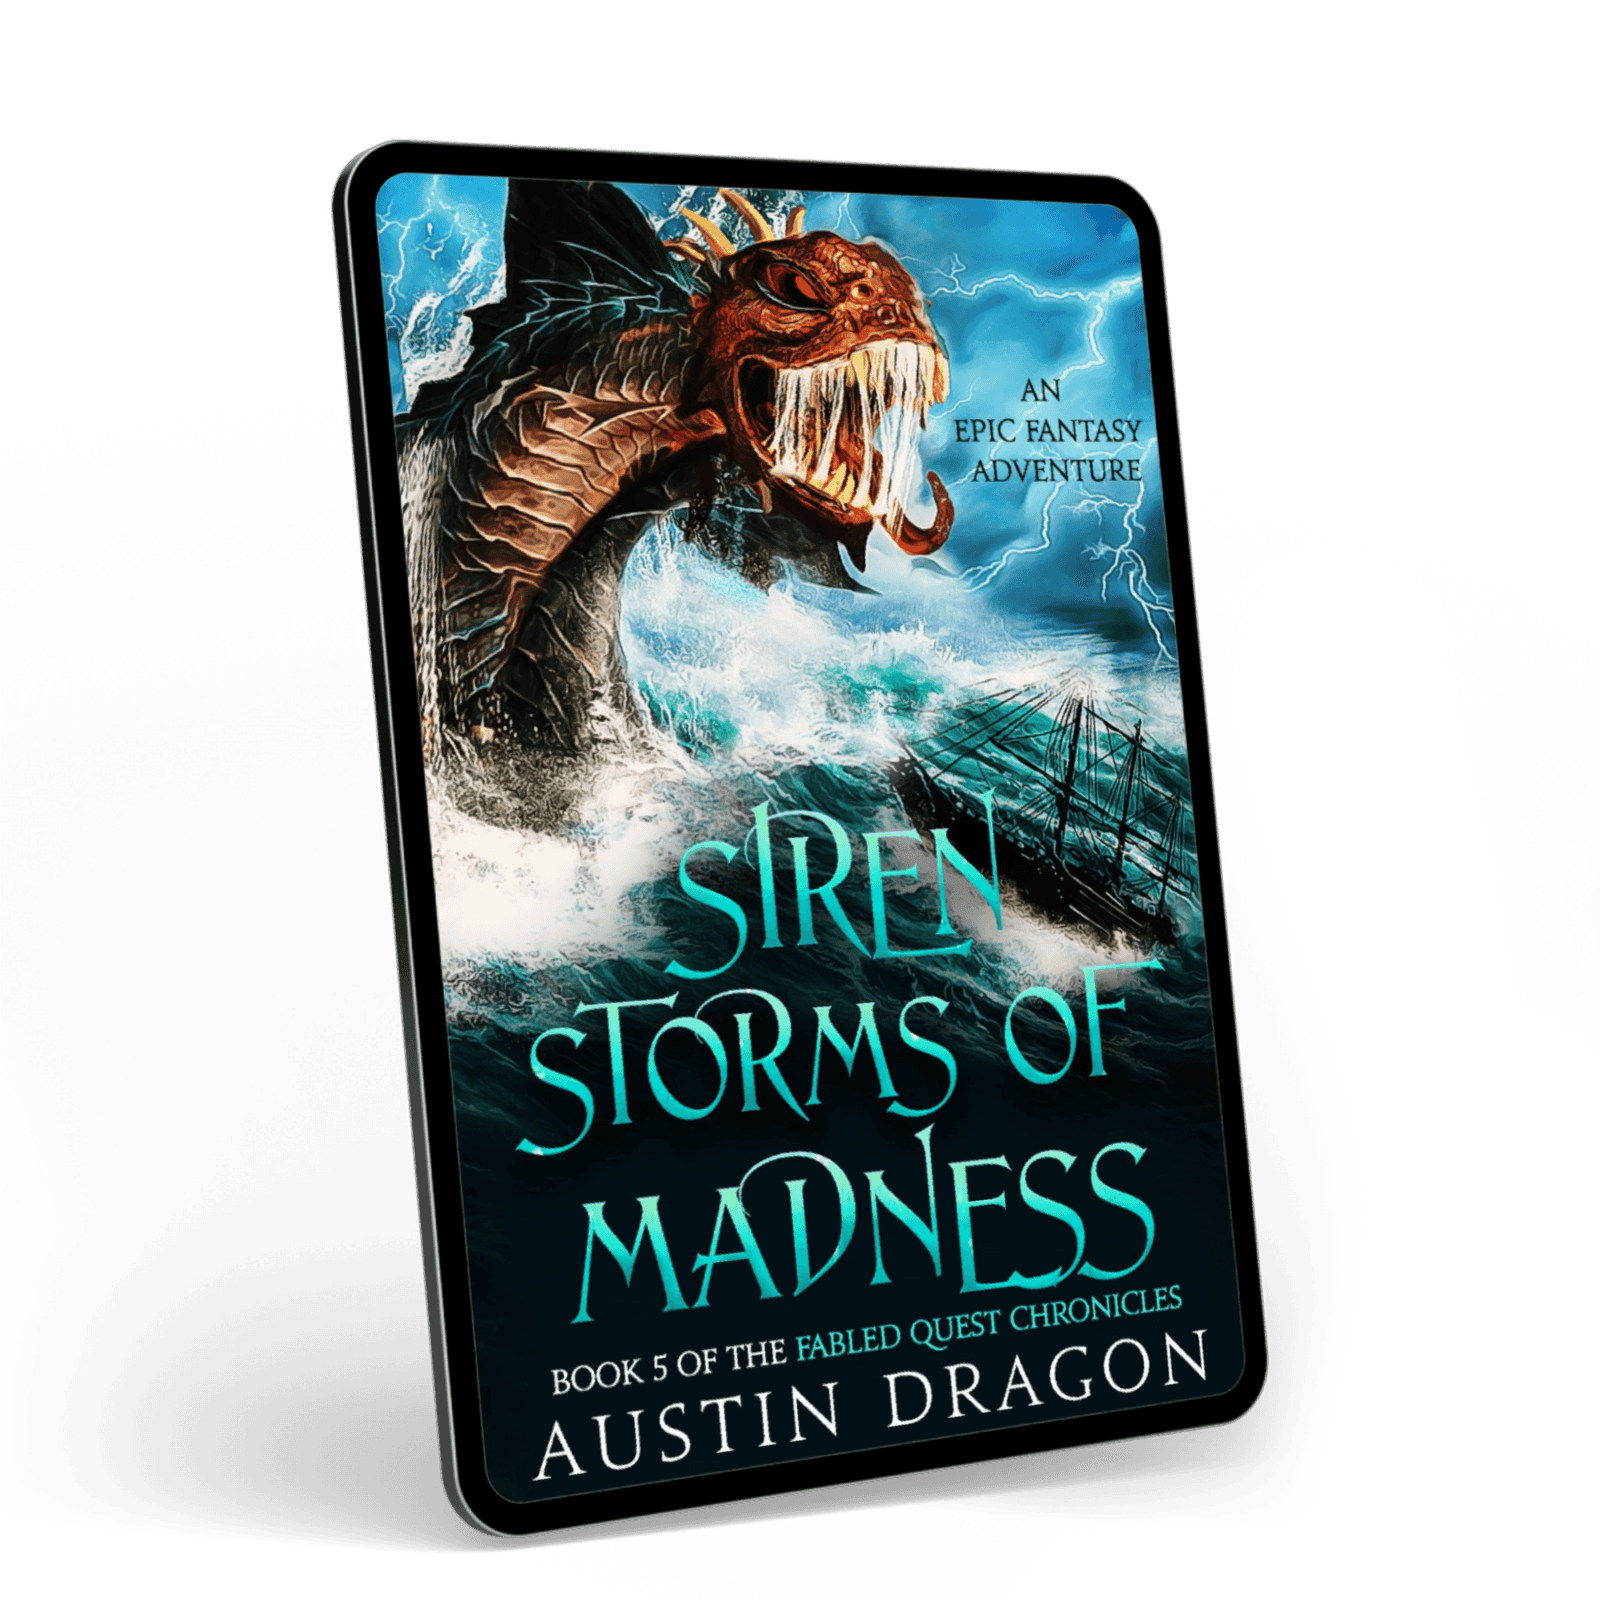 Siren Storms of Madness (Fabled Quest Chronicles, Book 5) Ebook